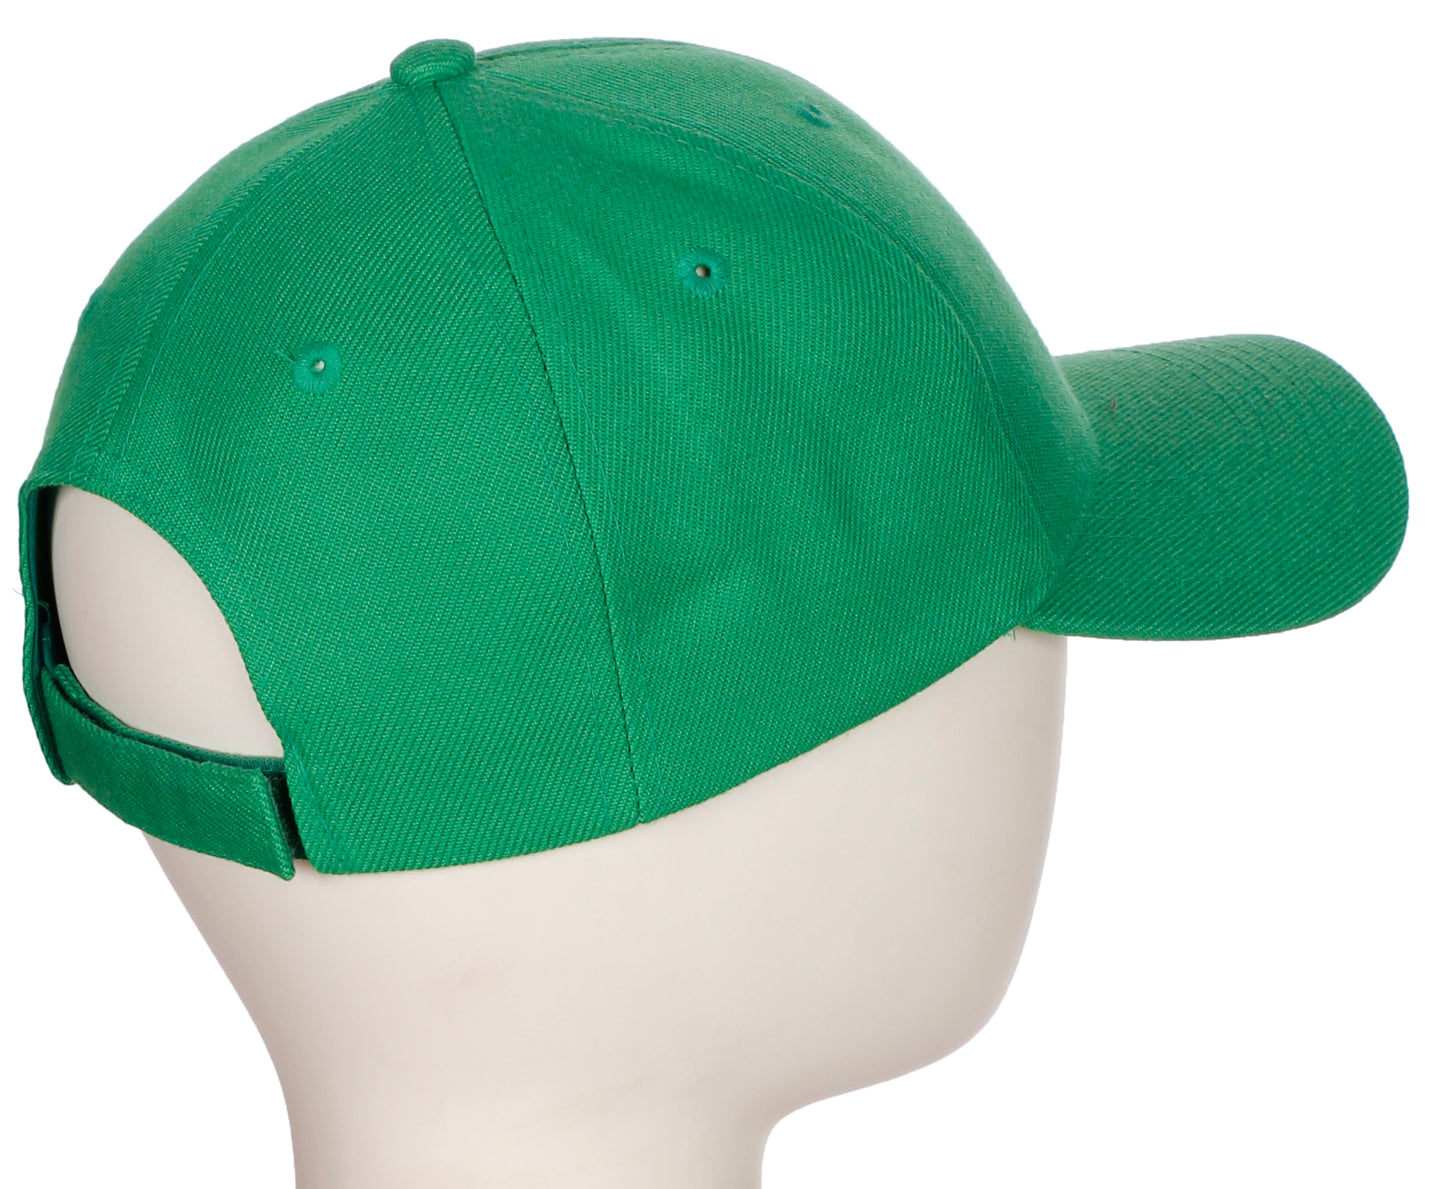 Classic Baseball Hat Custom A to Z Initial Team Letter, Green Cap White Gold